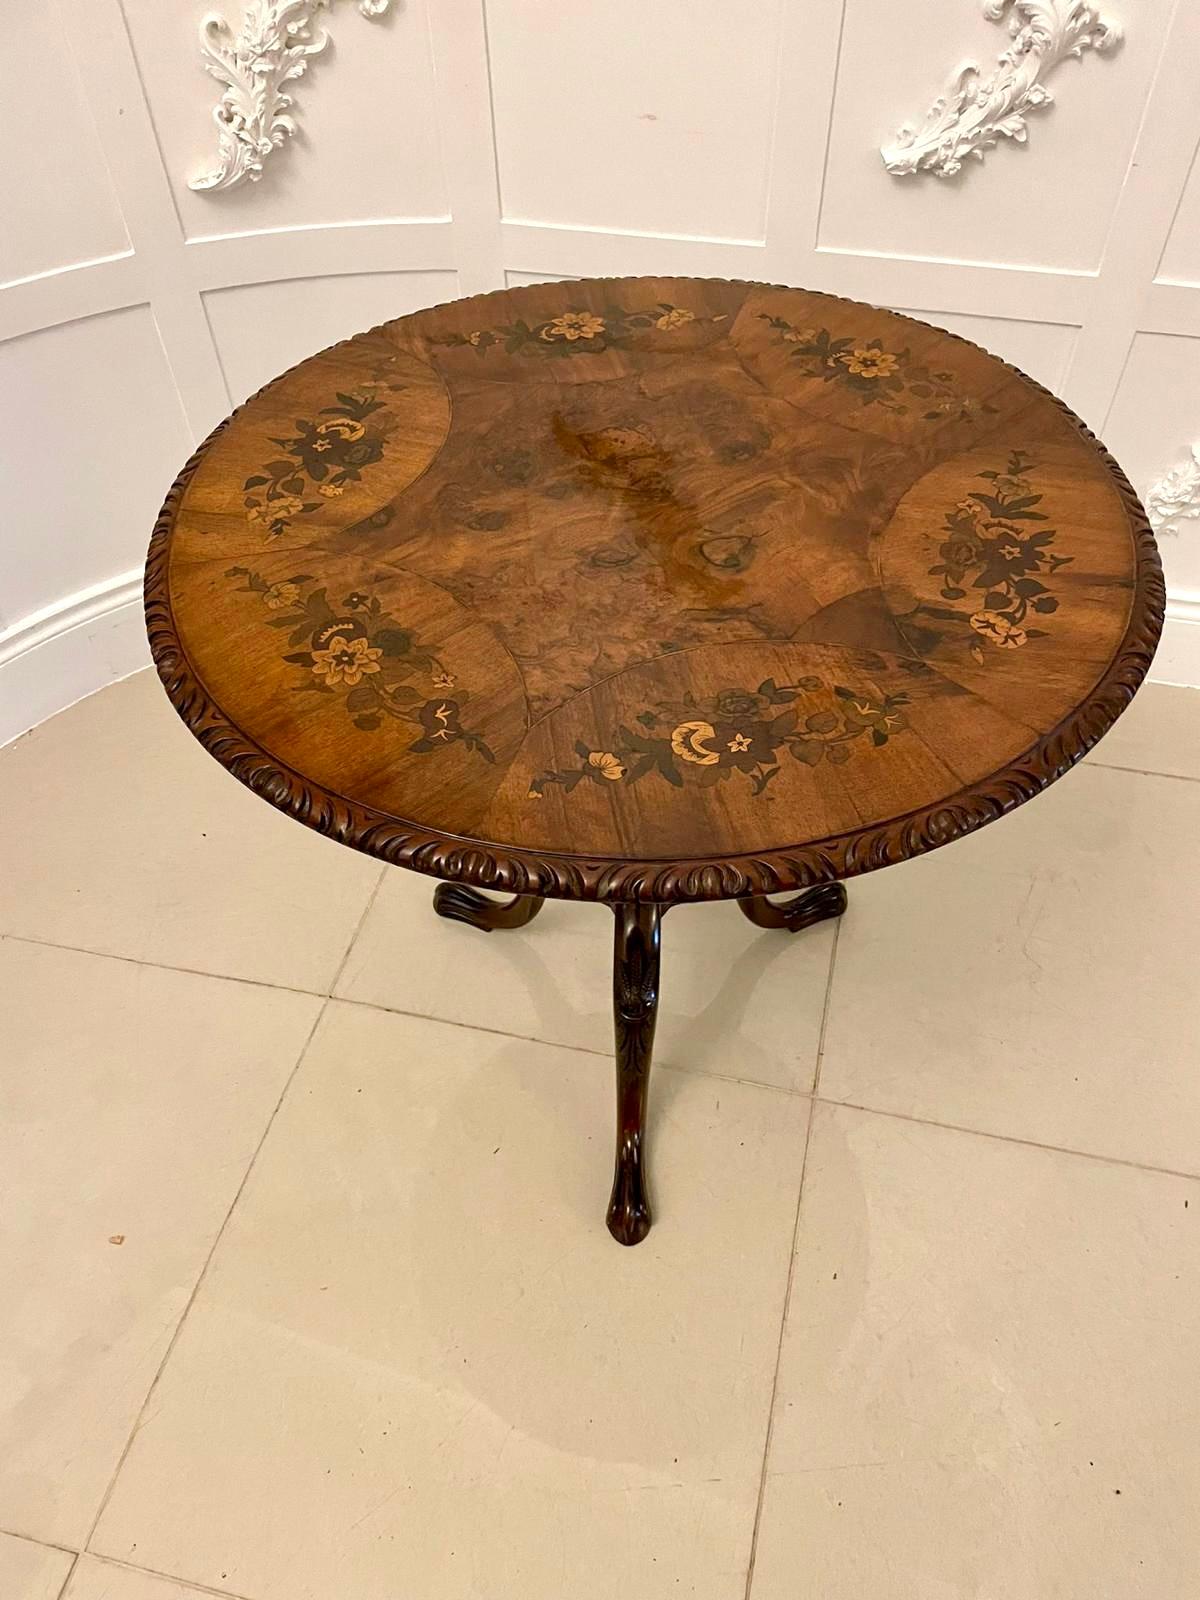 Antique Victorian quality burr walnut marquetry inlaid centre table having a quality burr walnut floral marquetry inlaid tilt circular top with a carved edge supported on a turned carved column standing on three shaped carved cabriole legs with claw